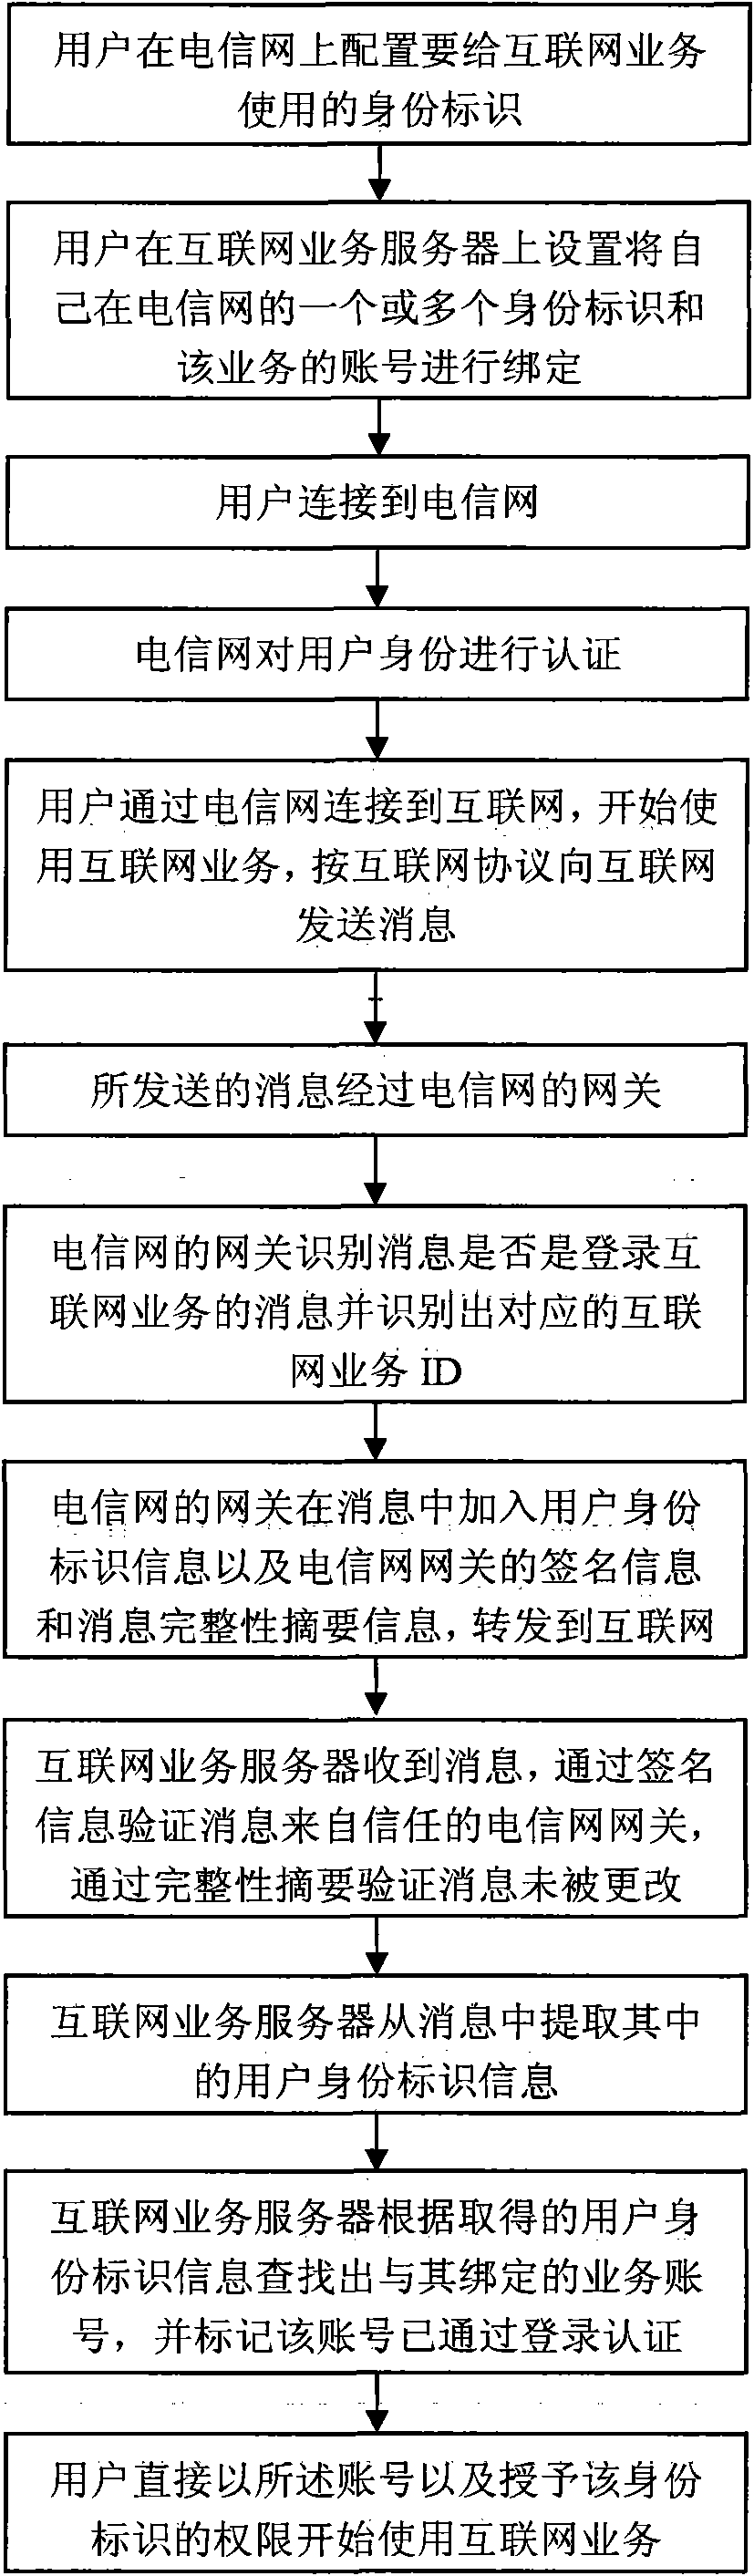 Method by utilizing telecommunication network to supply user identity label and user identity authentication to Internet service